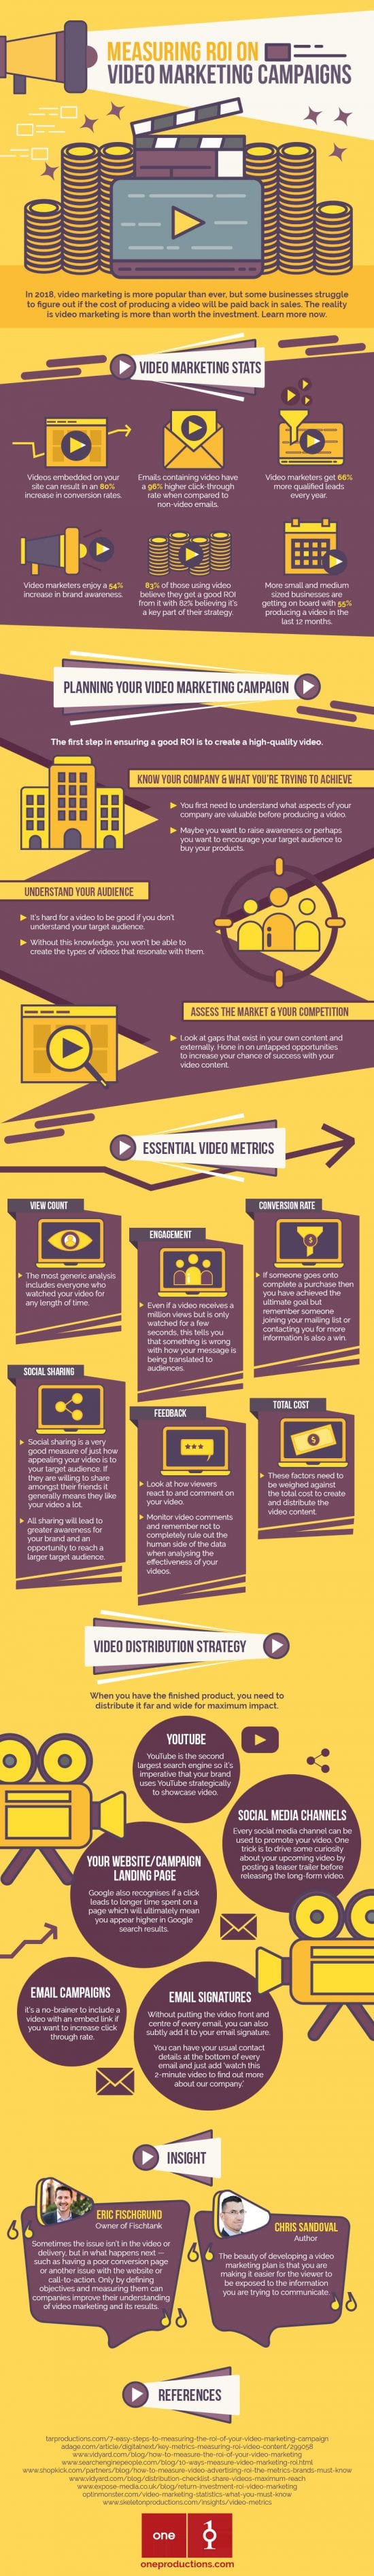 Measuring ROI on Video Marketing Campaigns [Infographic] | Smart Insights